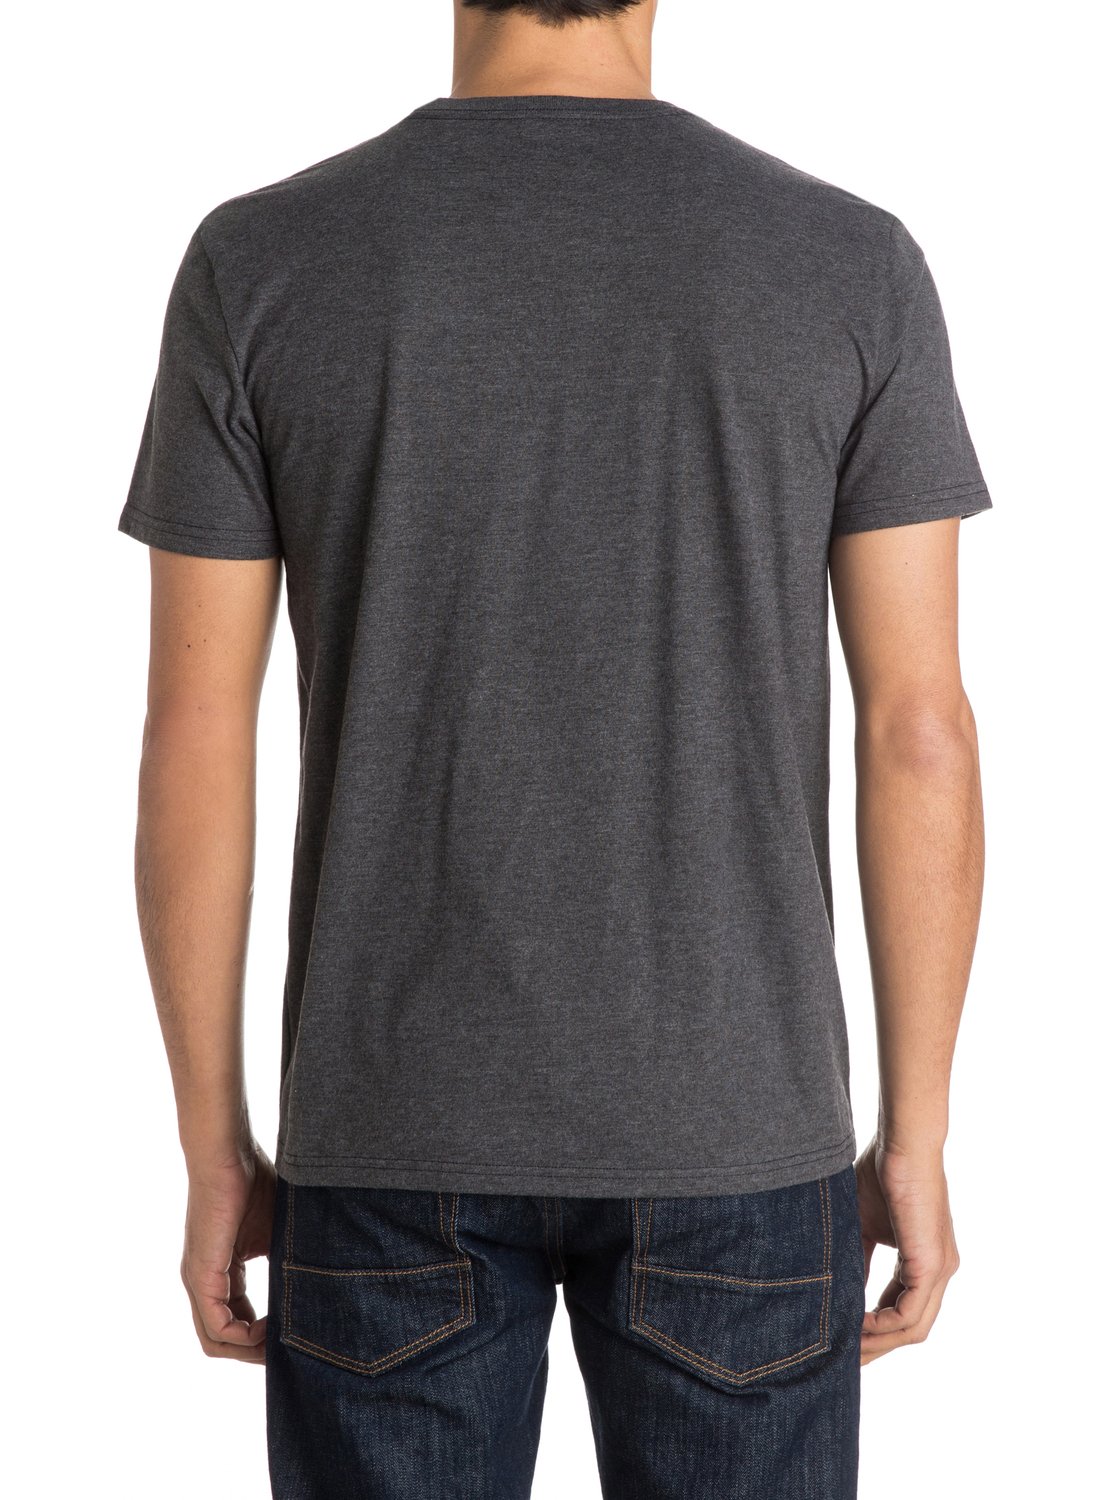 Just Surf Modern Fit Tee 888701416371 | Quiksilver